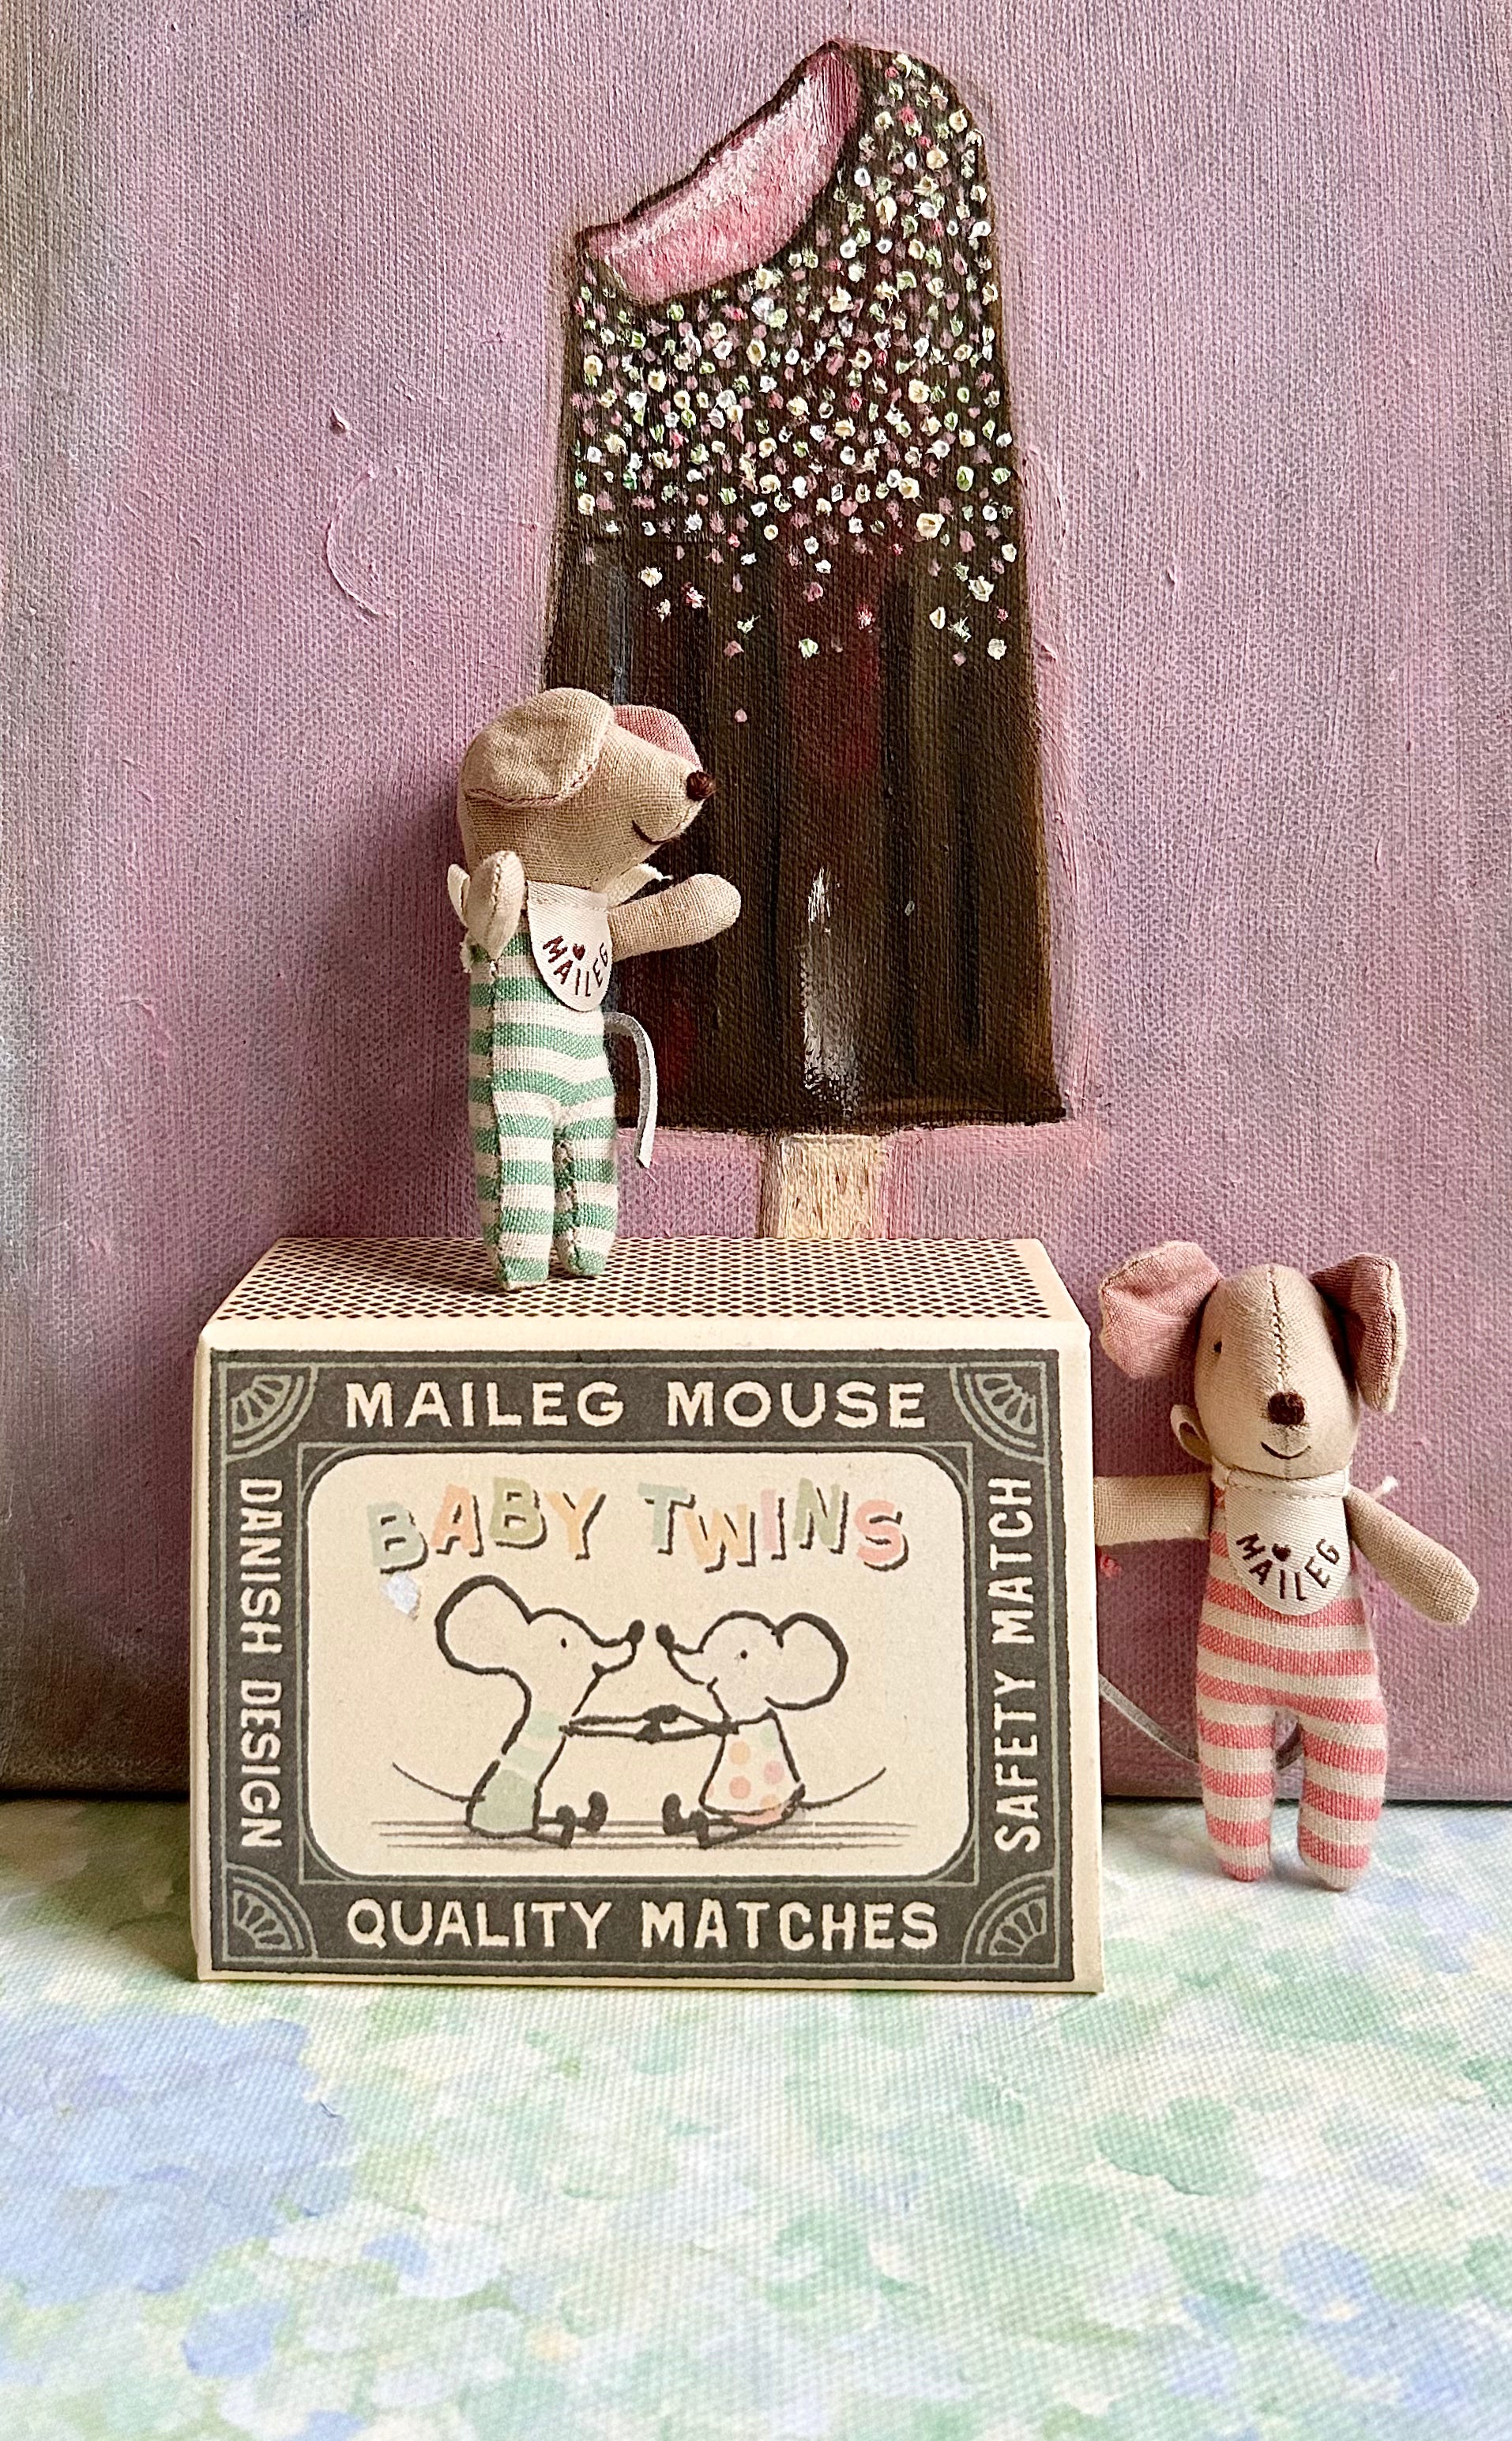 Baby Twins in Matchbox - 2016